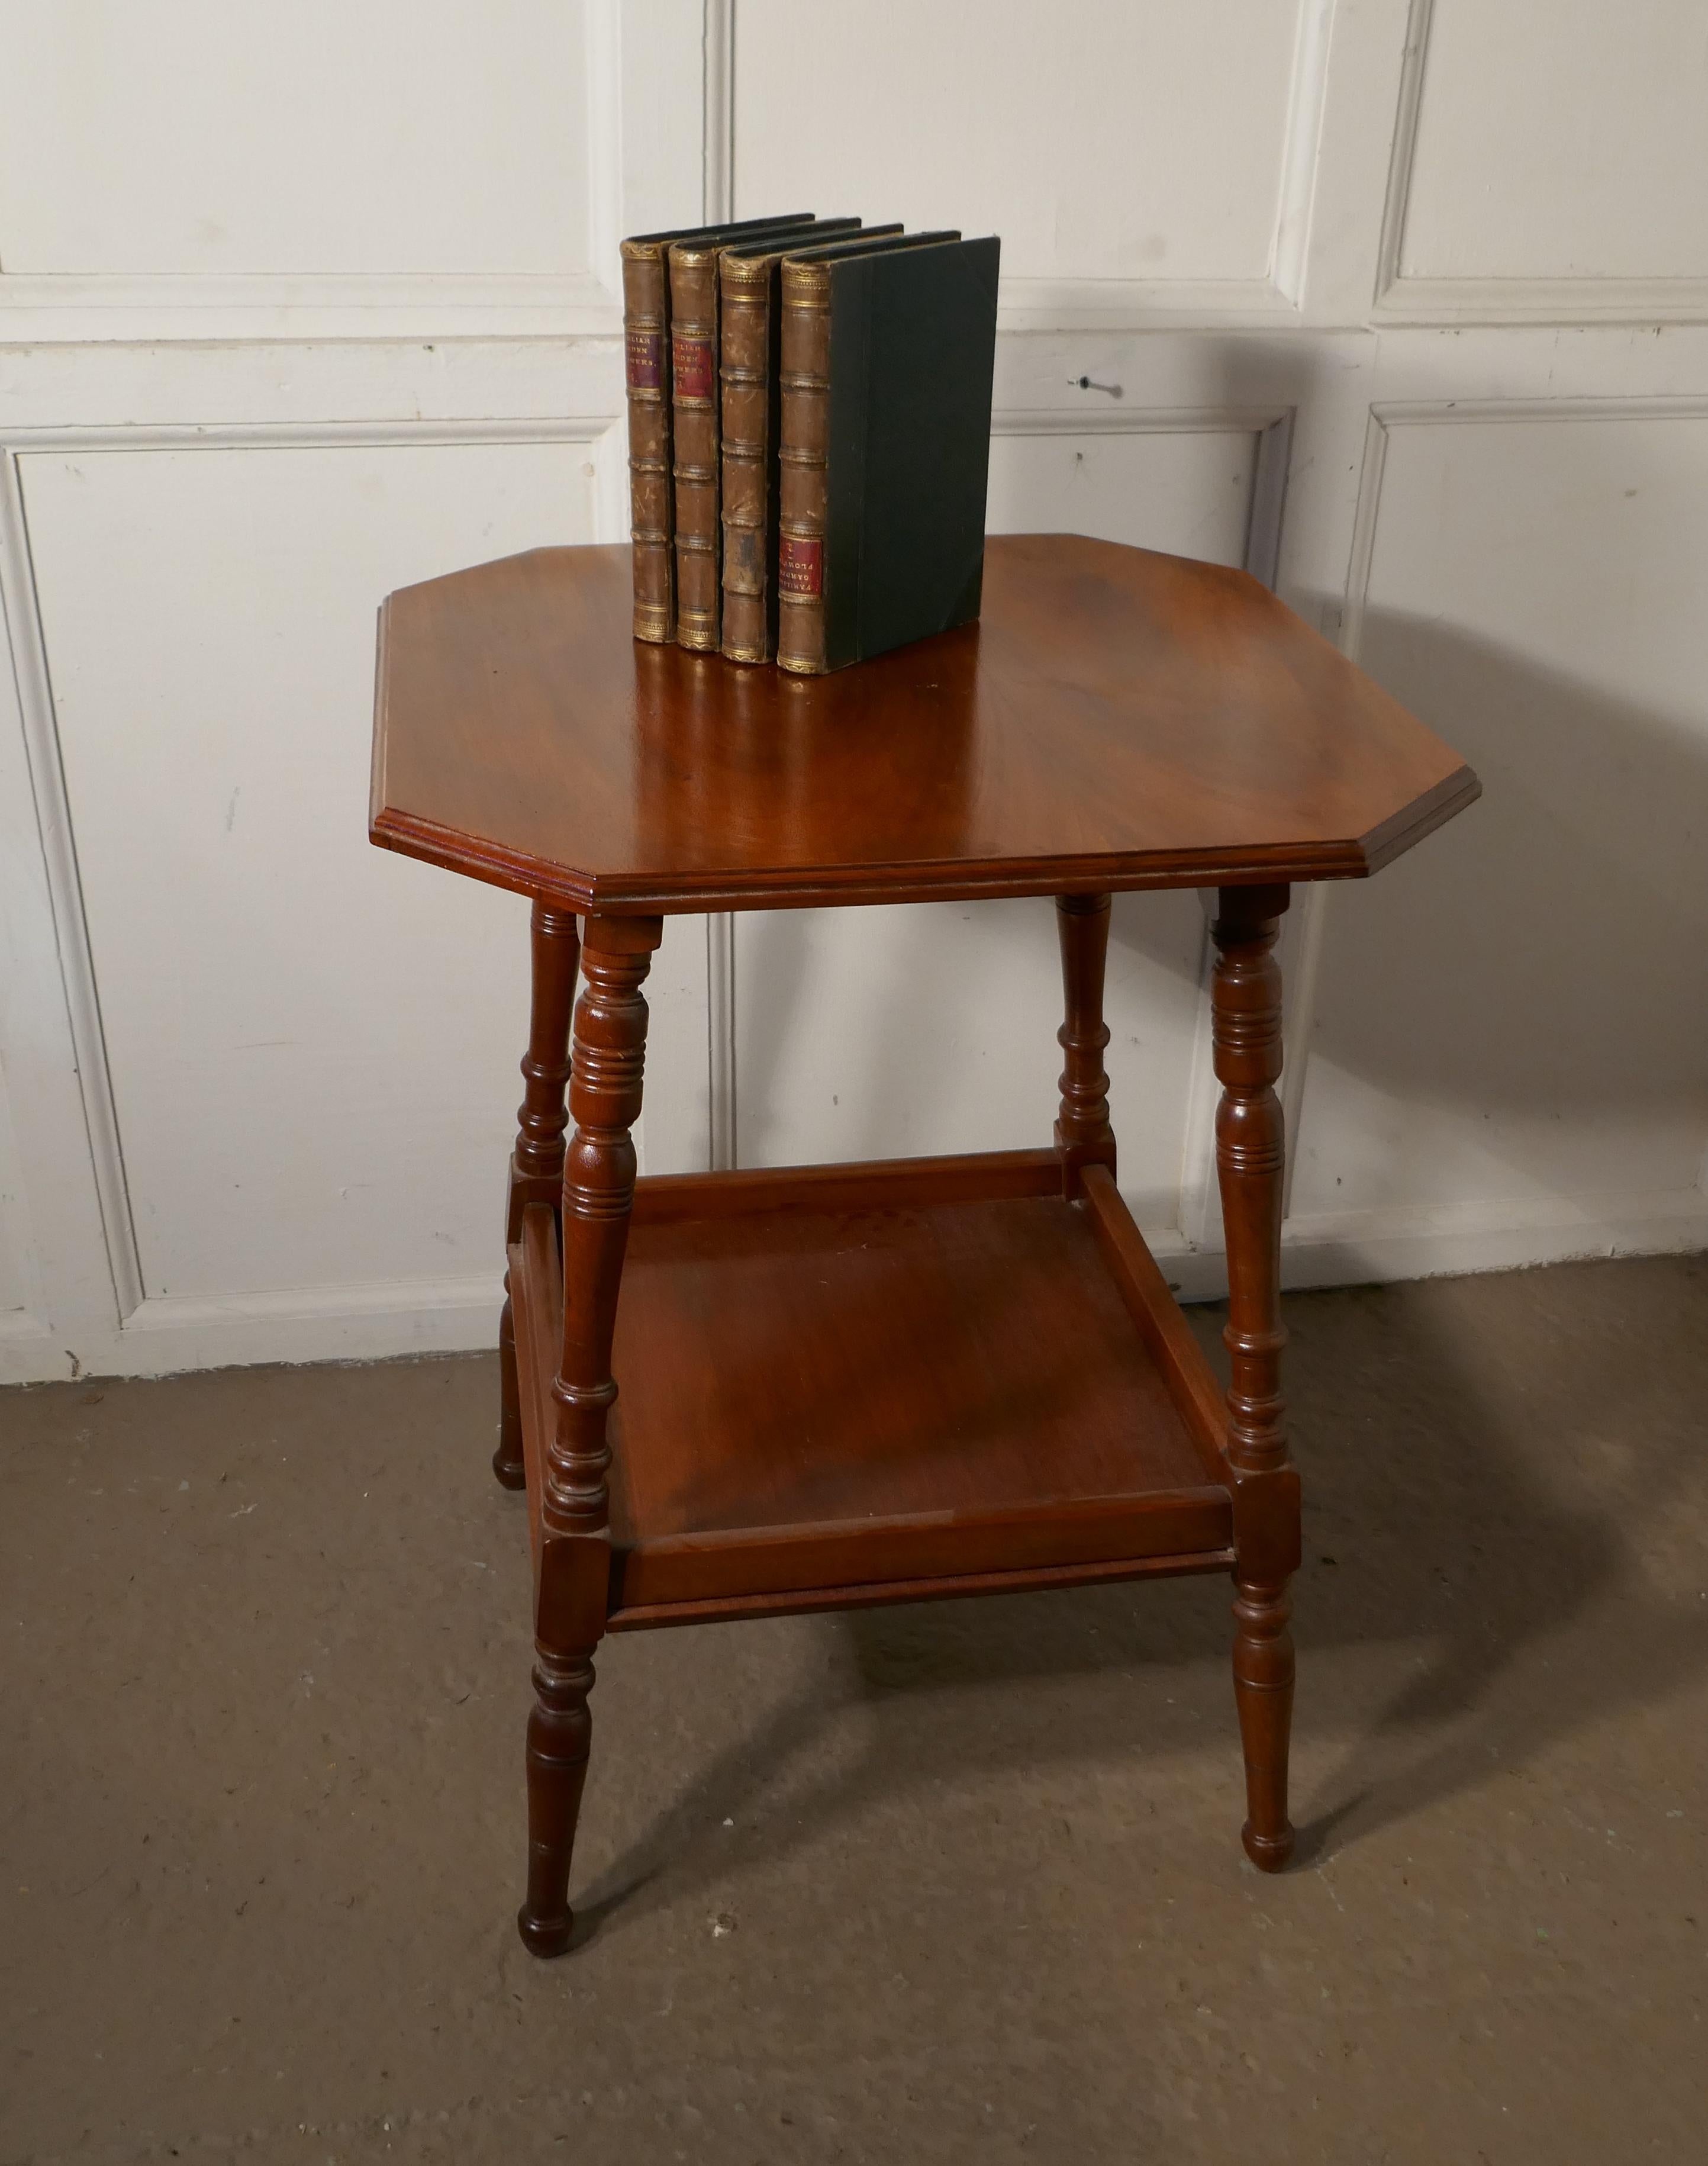 An Edwardian blonde mahogany étagère or occasional table

This useful little table has two tiers, the top is square with canted corners and a moulded edge, the under-tier is galleried and the table is set on elegant splayed turned legs

This is